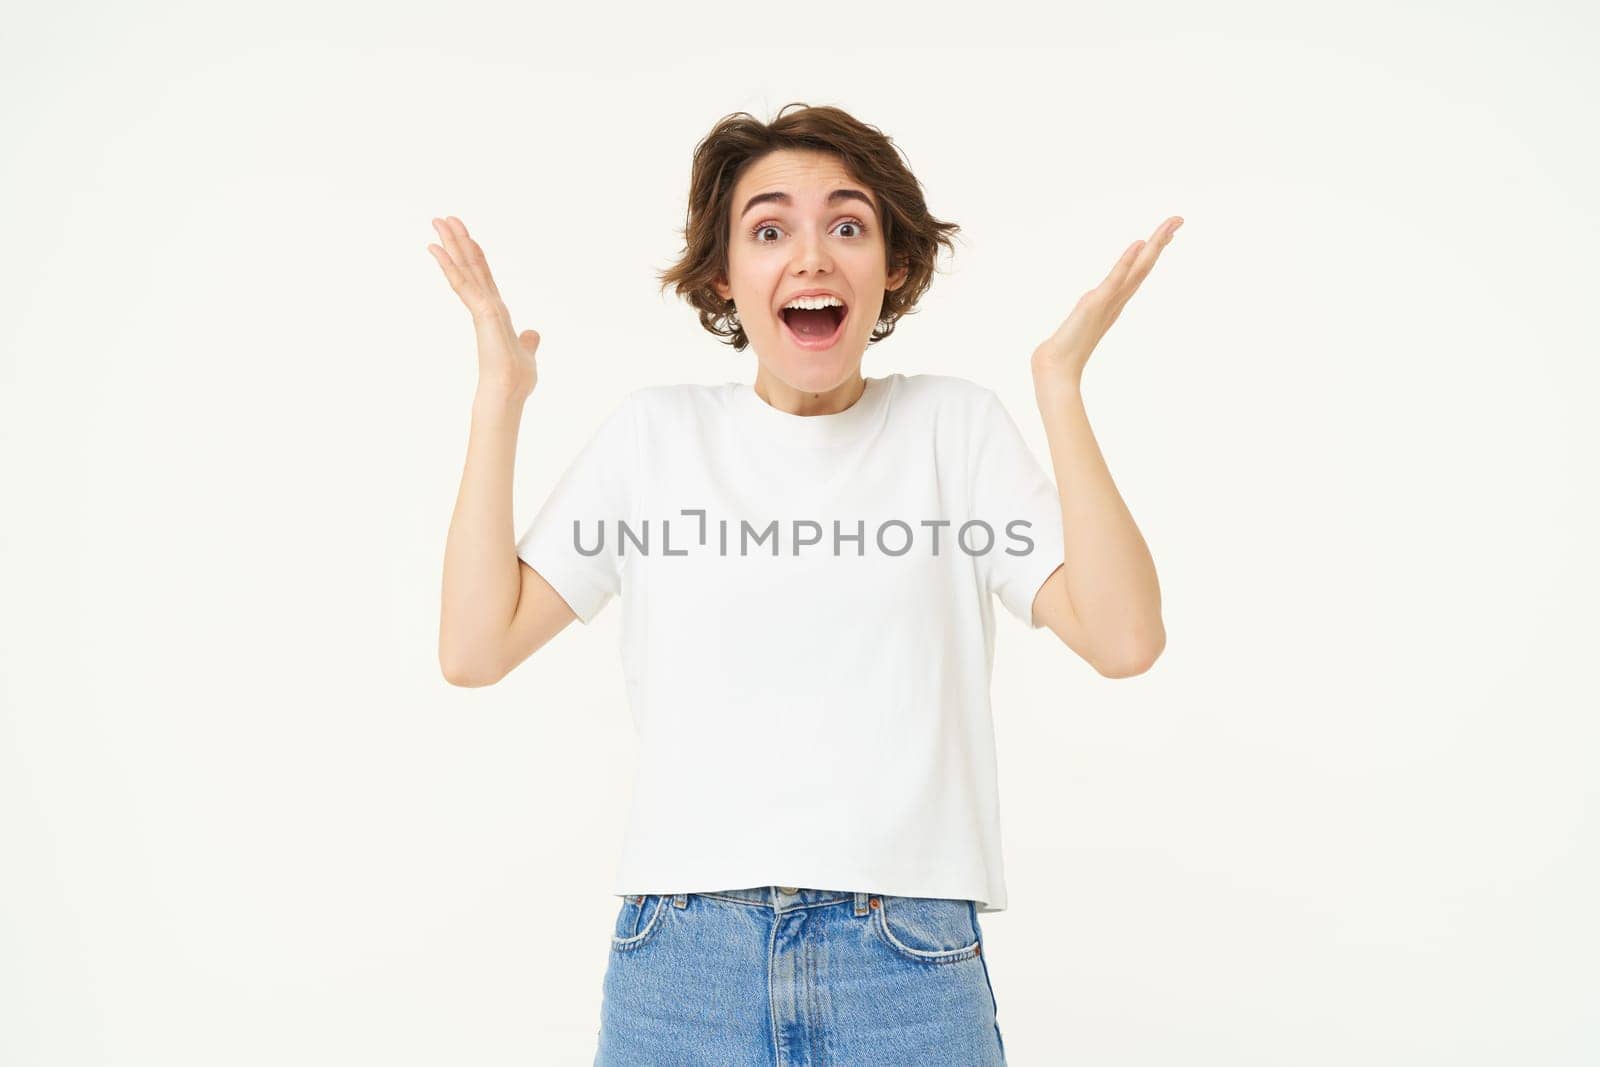 Portrait of amazed, happy young woman, raising hands up and looks surprised, standing excited against white background.